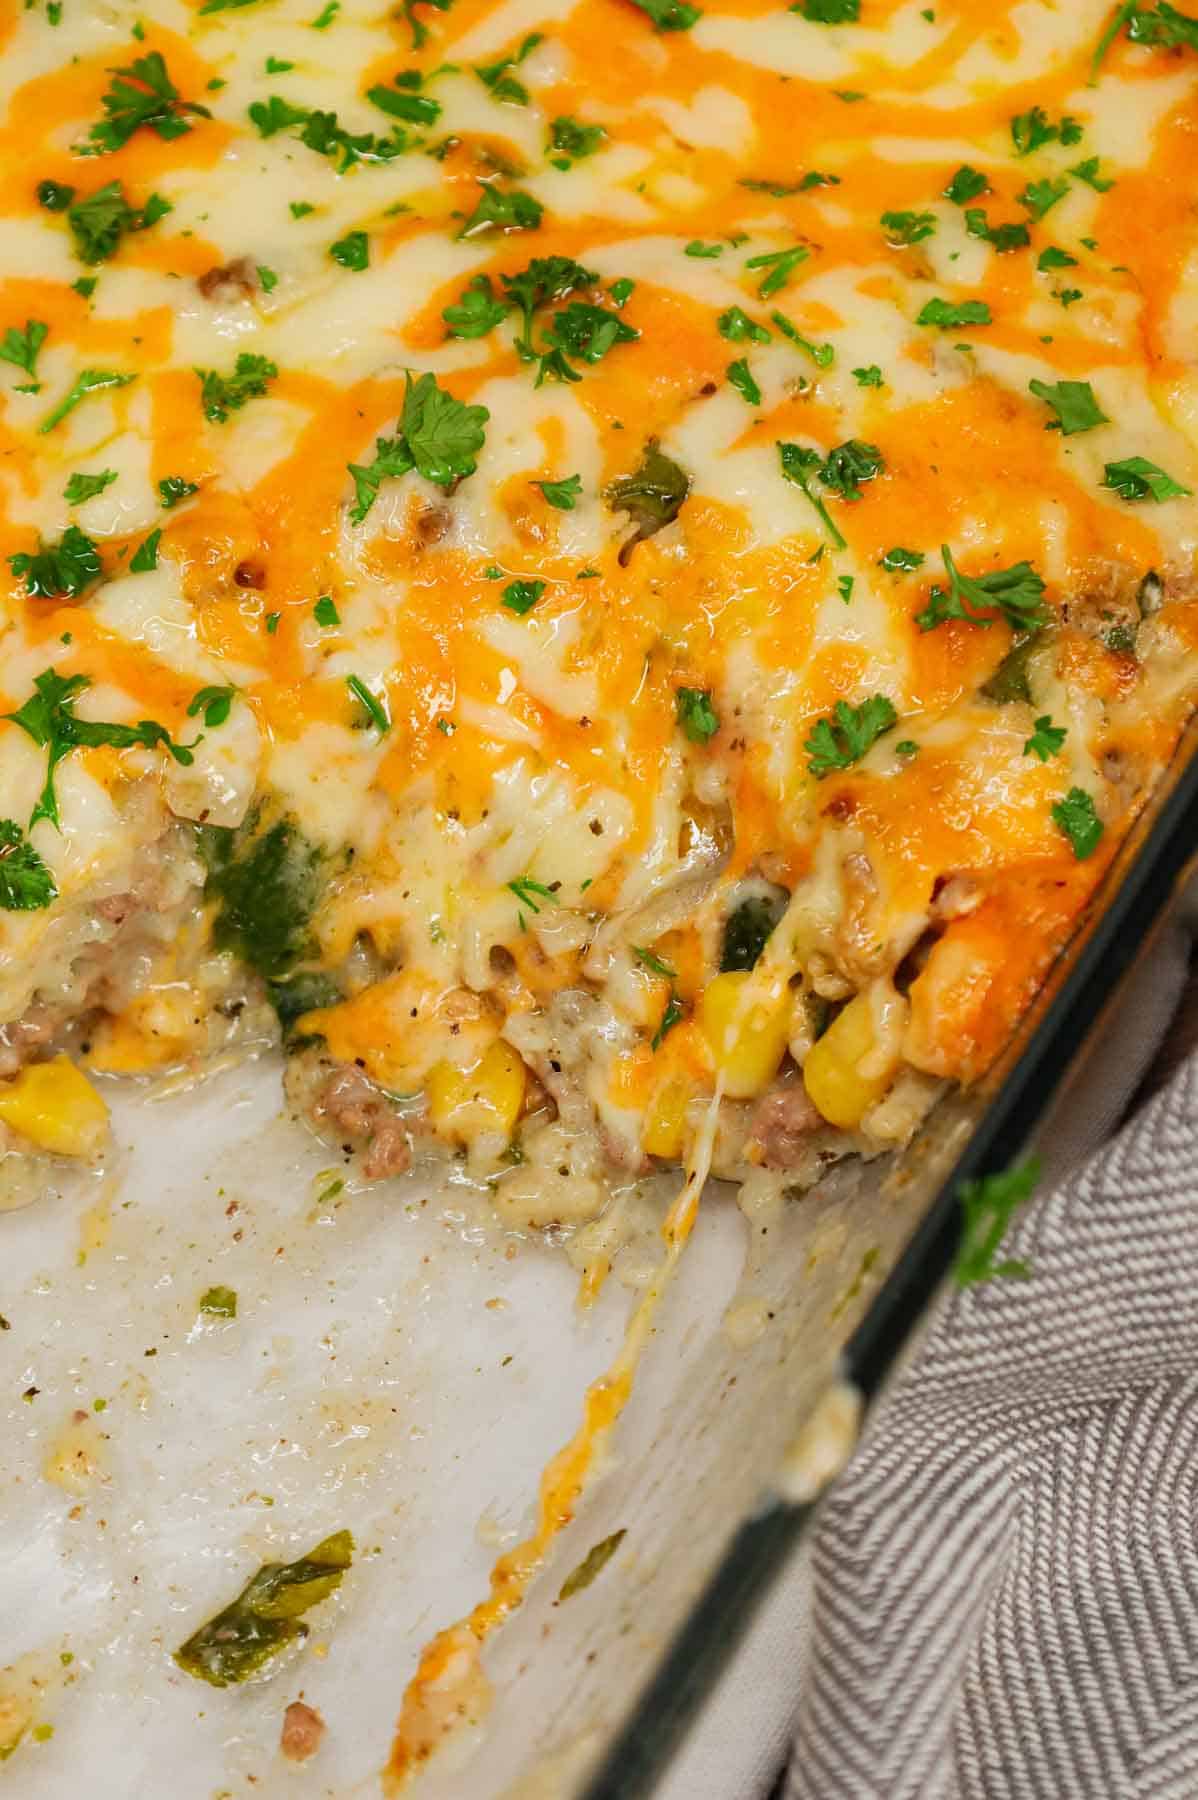 Cheesy Hamburger Rice Casserole is a hearty casserole loaded with ground beef, instant rice, frozen chopped spinach, corn, cream of mushroom soup, shredded cheddar and mozzarella cheese.